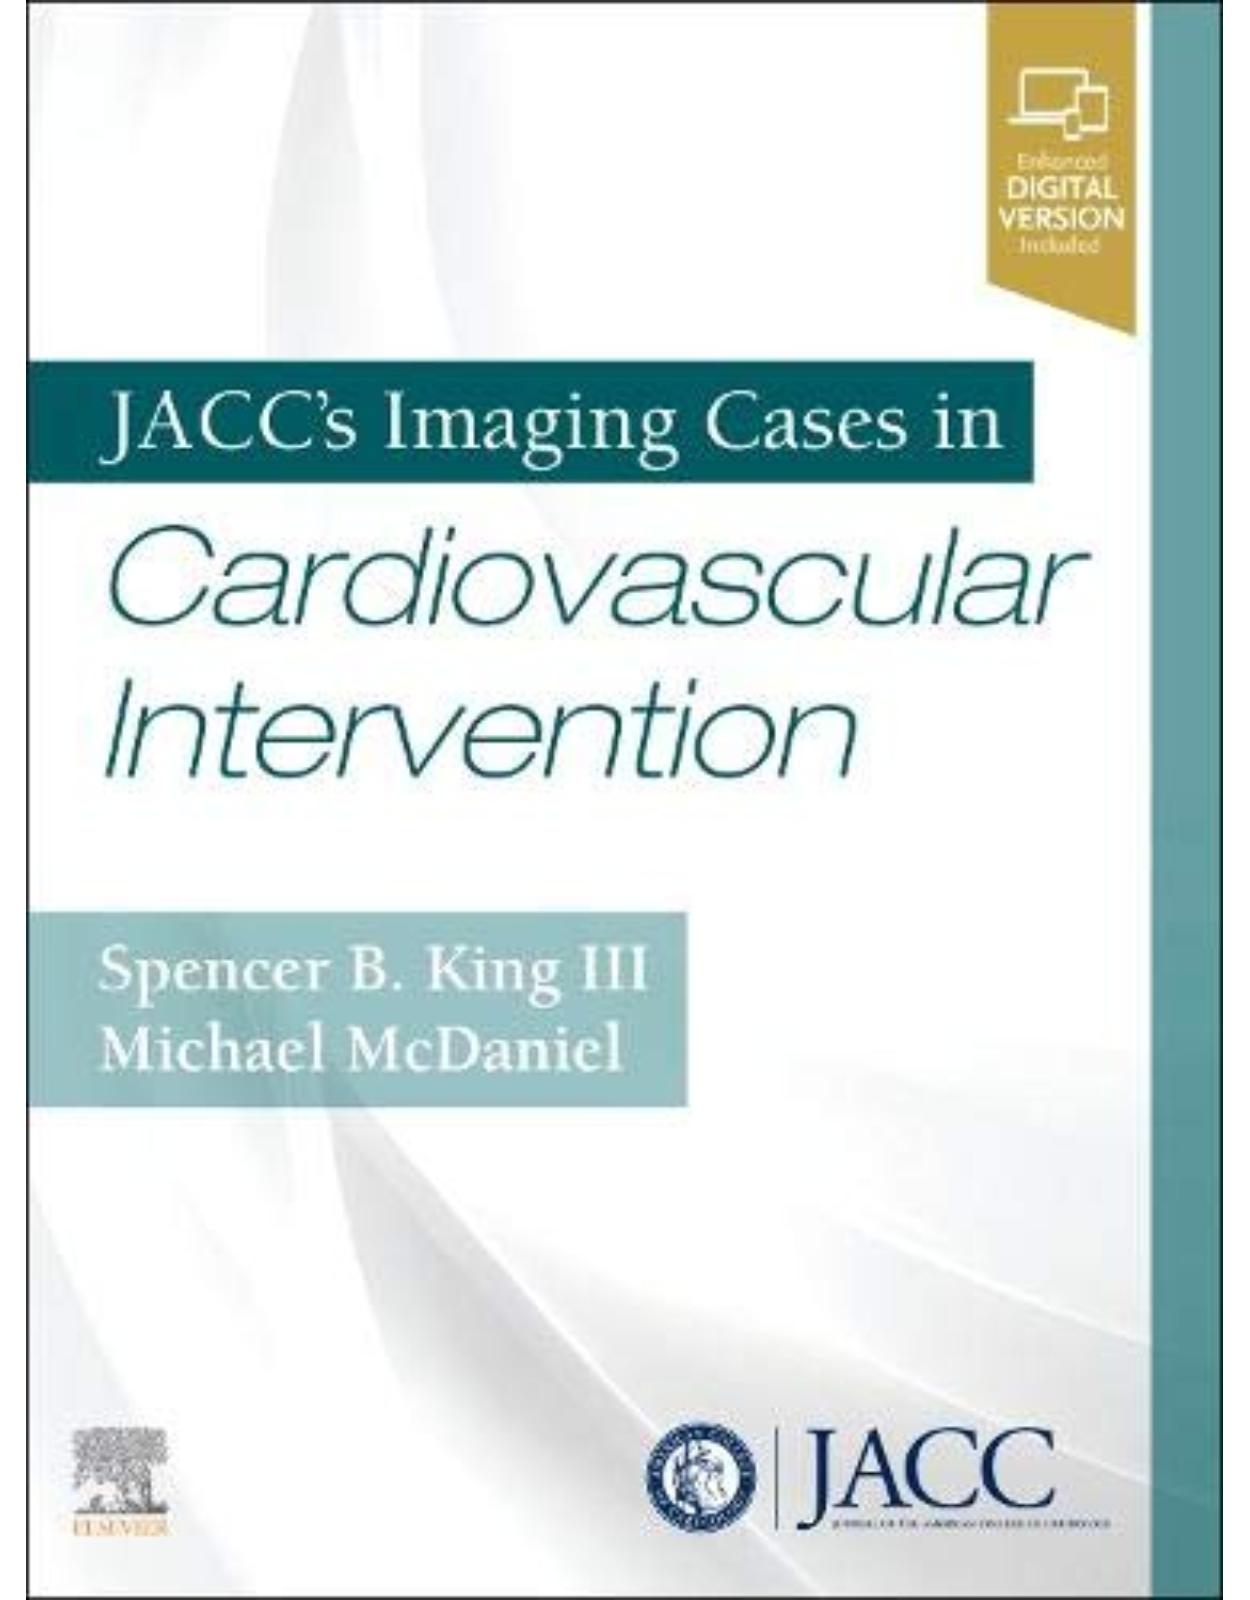 JACC’s Imaging Cases in Cardiovascular Intervention